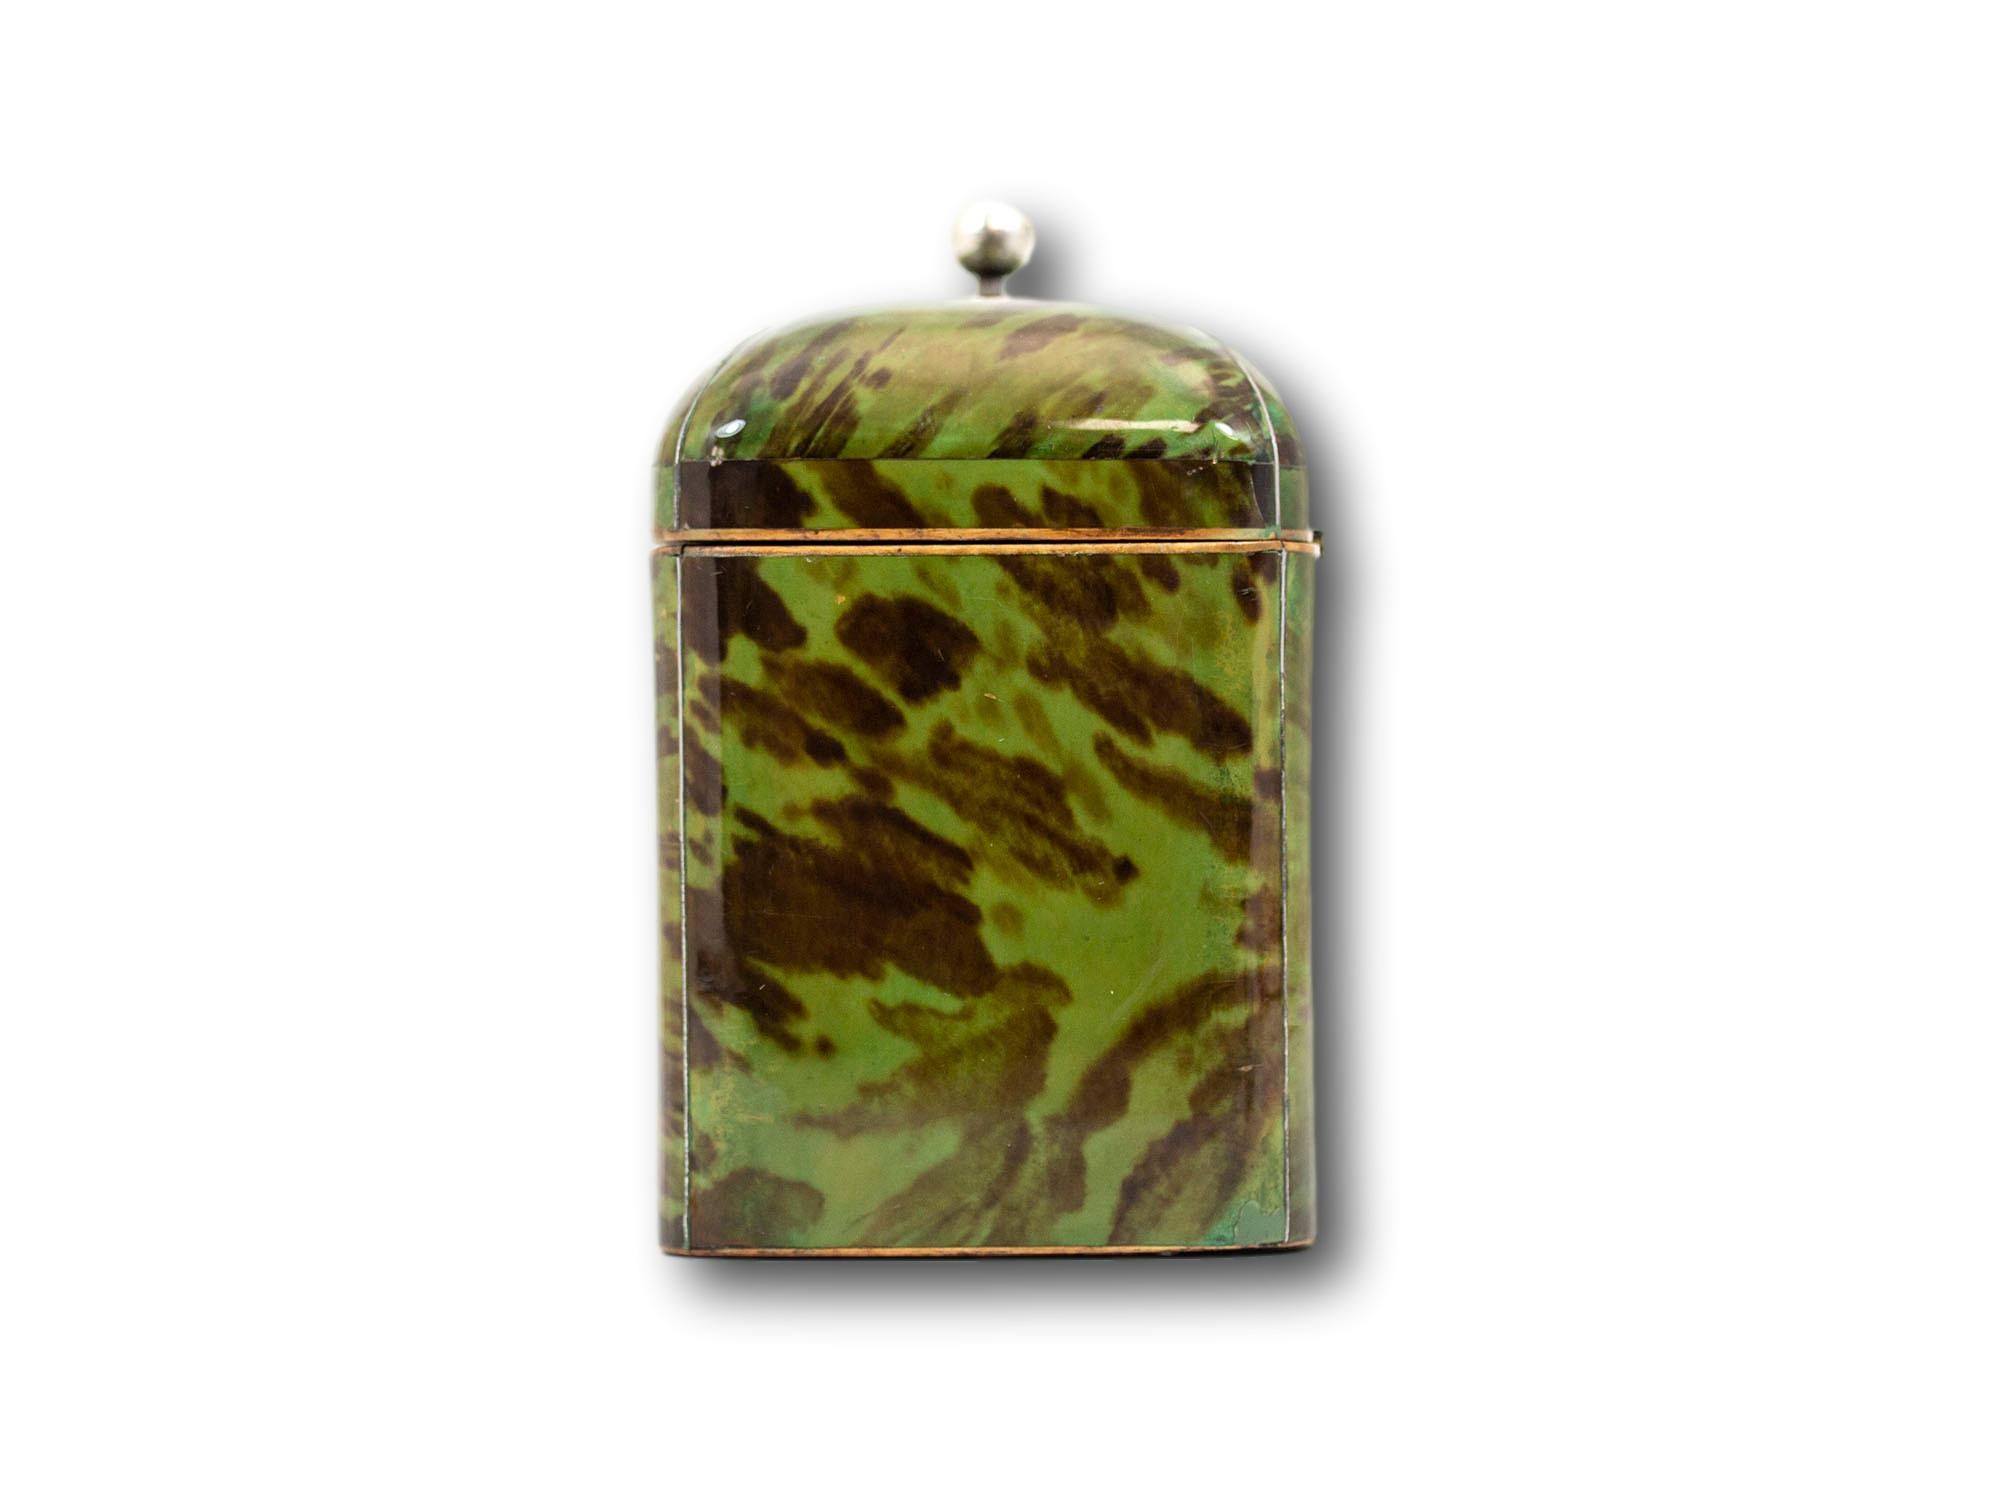 From our tea caddy collection, we are delighted to offer this charming dome-topped rectangular green tortoiseshell tea caddy. The tea caddy is finished in vibrant green tortoiseshell to the exterior with silver stringing to the extremities. The lid